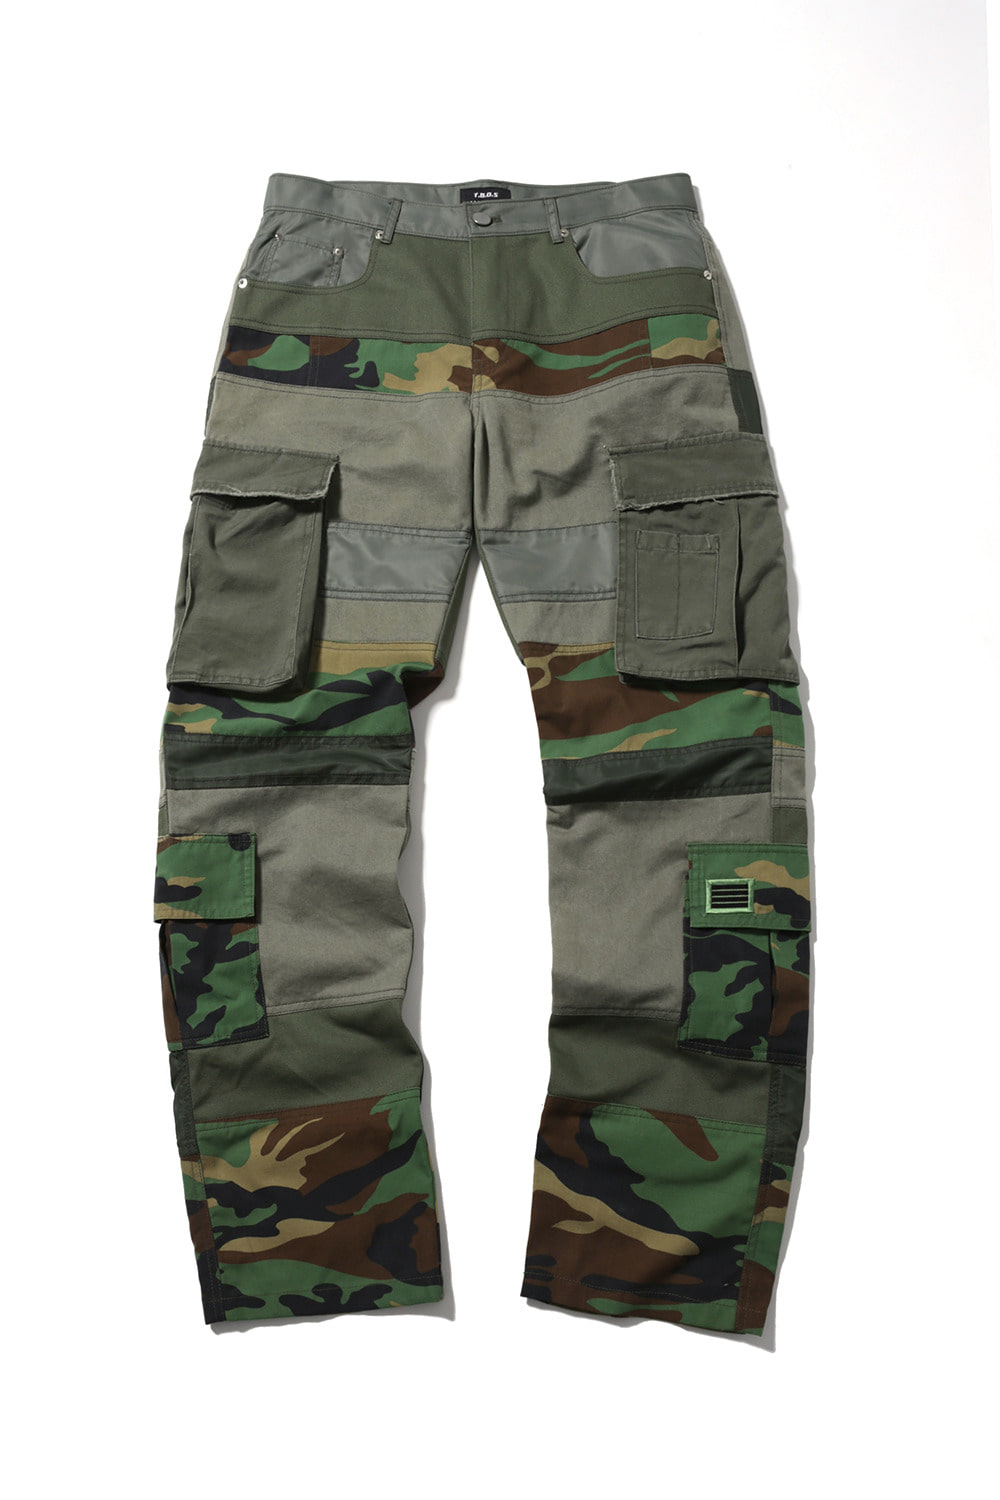 Deconstructed camouflage pants